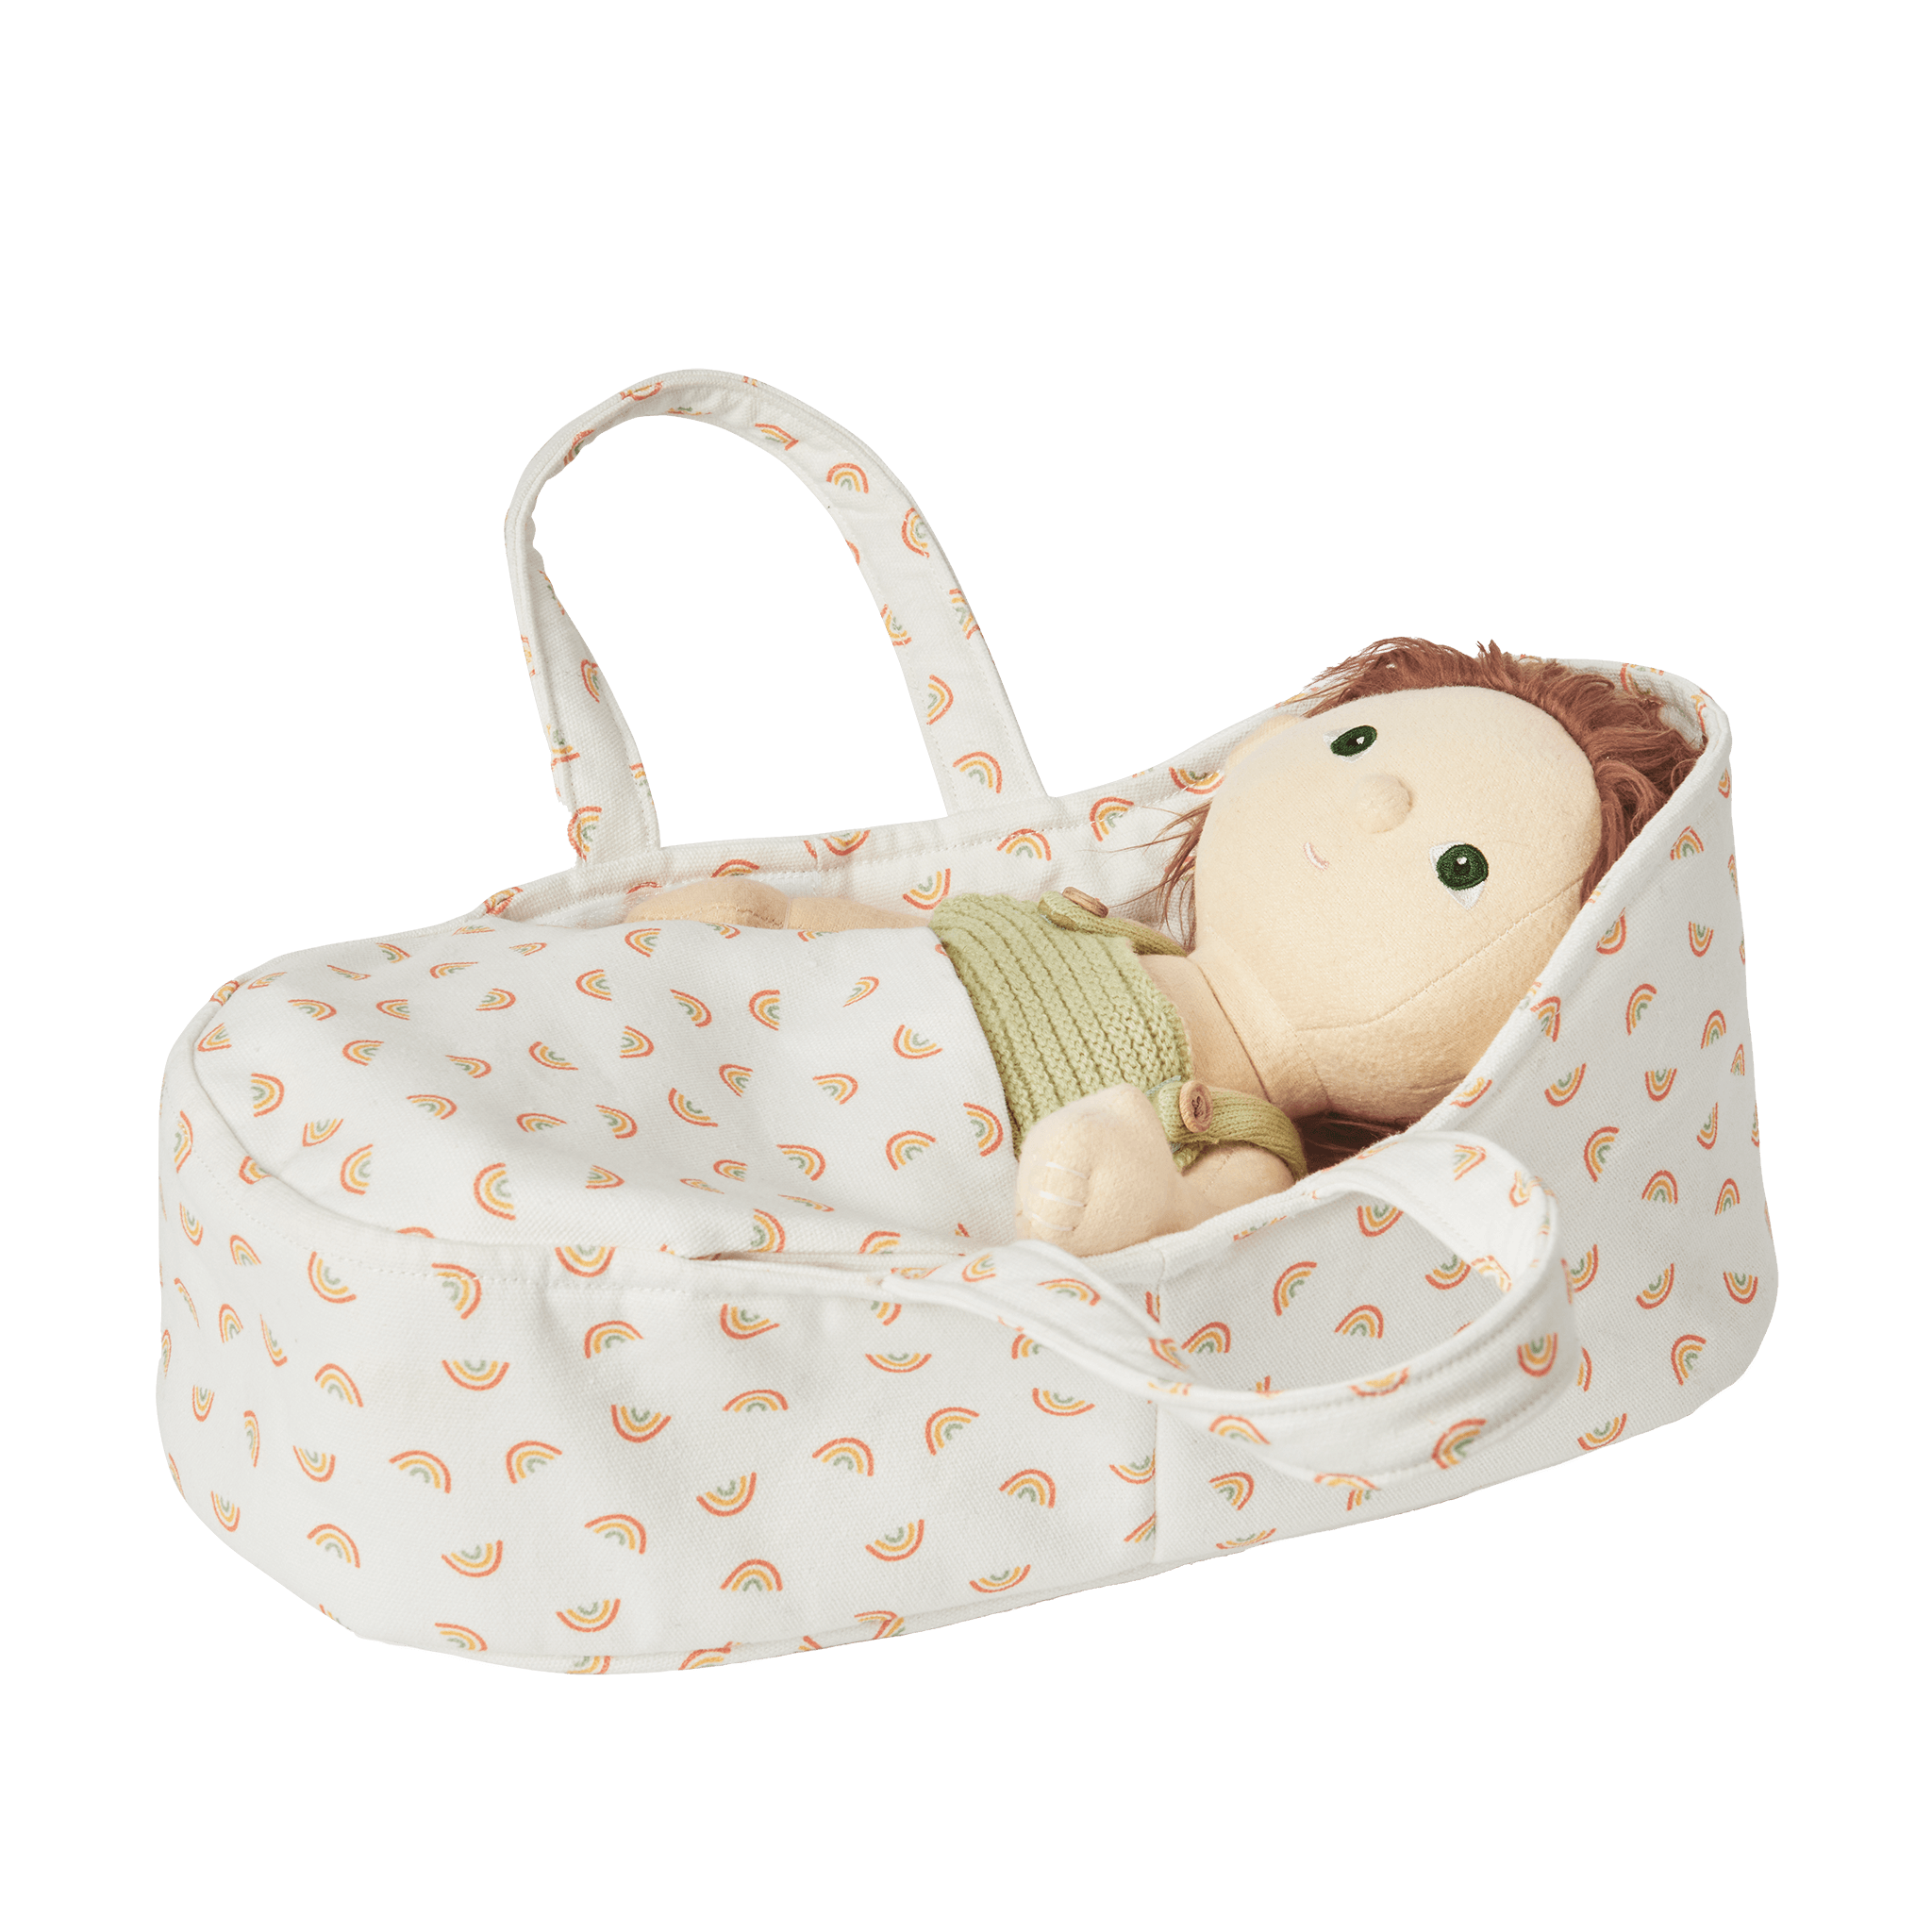 Dinkum Dolls Carry Cot Rainbow Print - Why and Whale